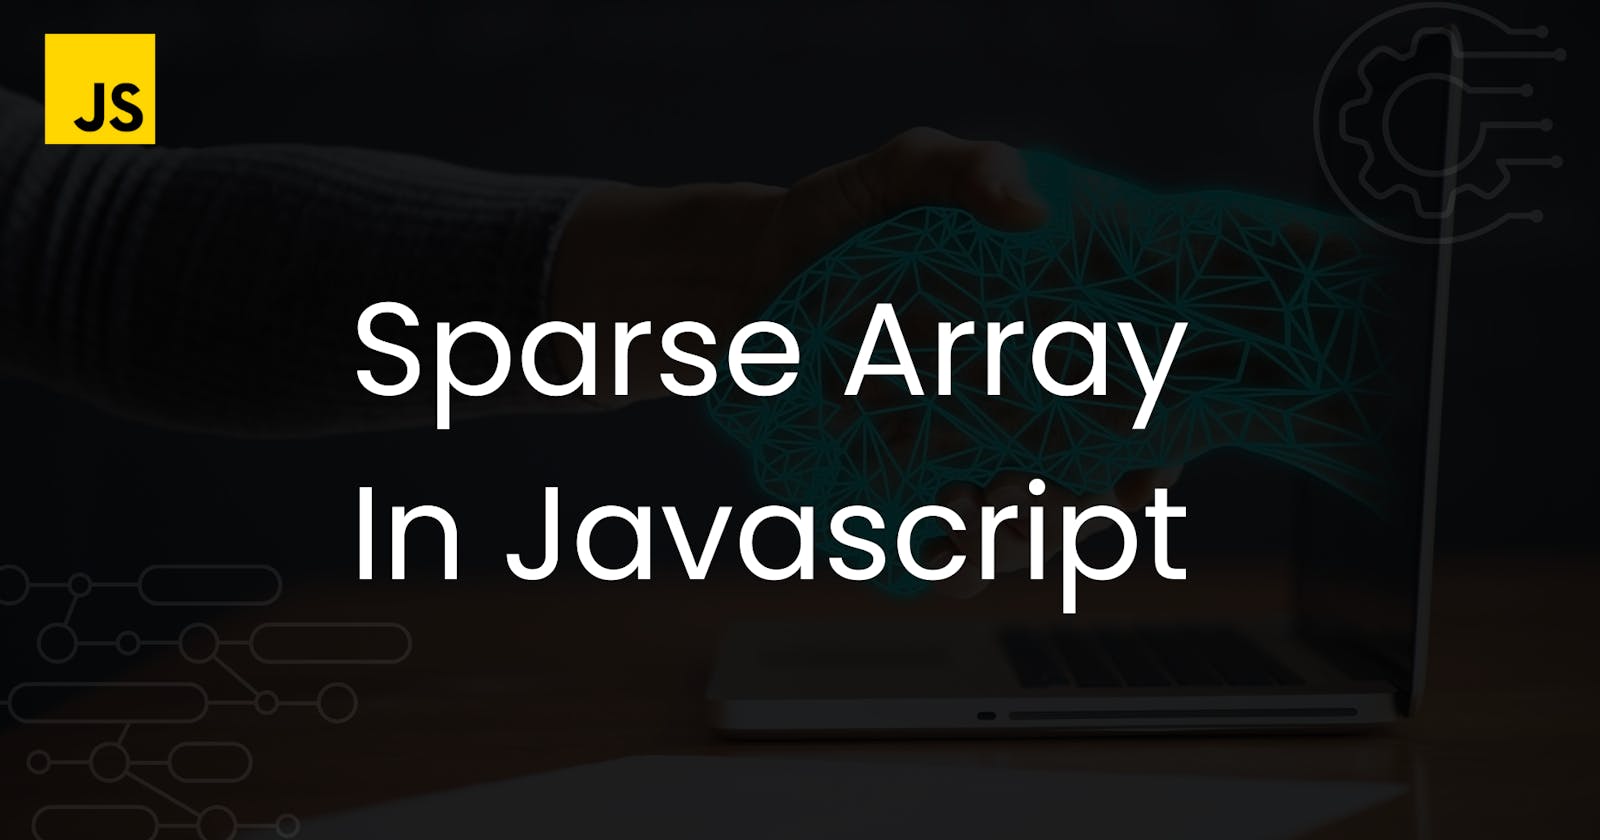 Ever heard about Sparse arrays in JS?